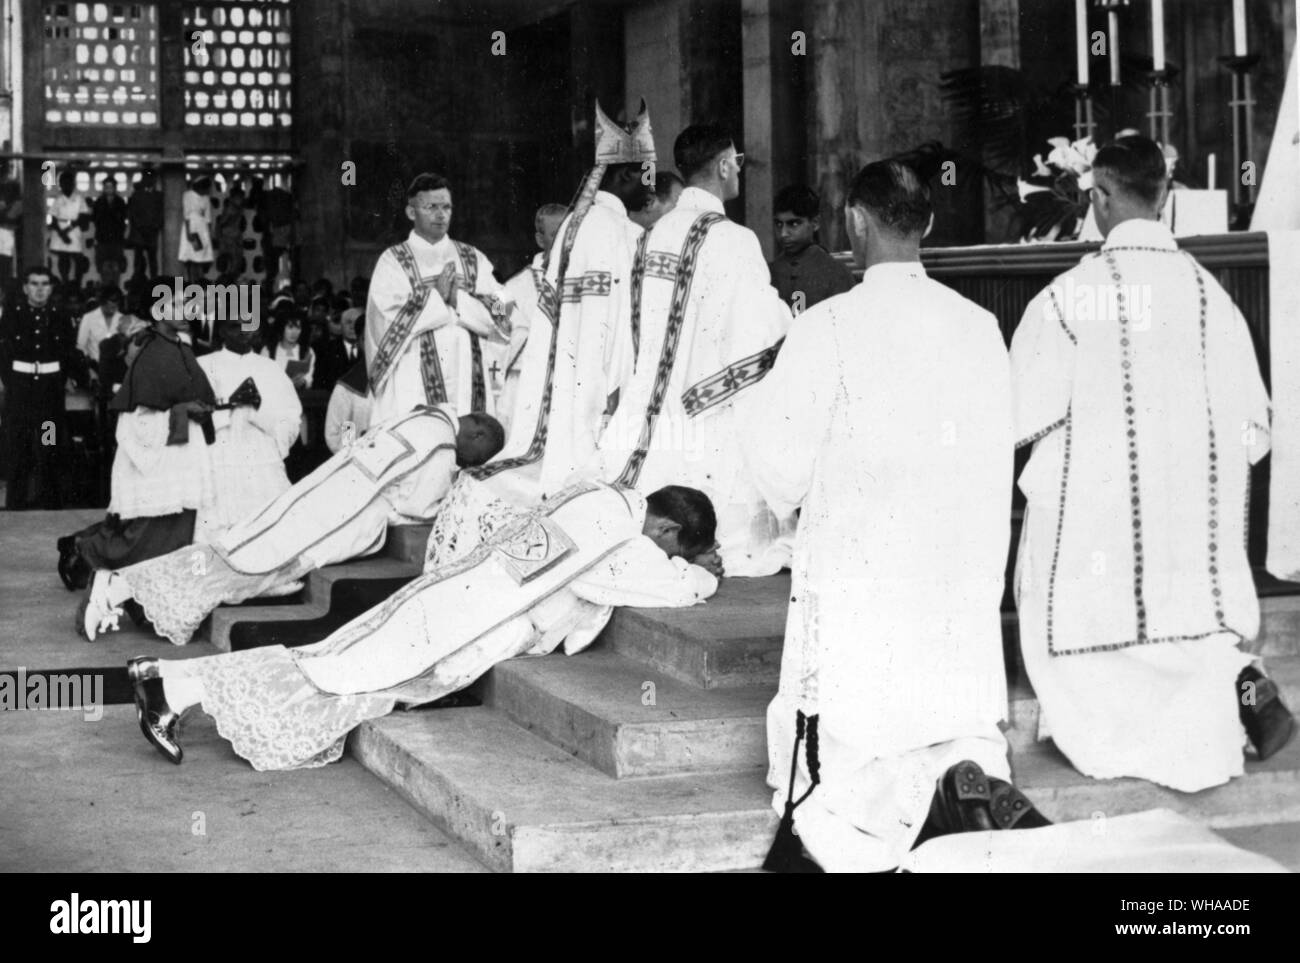 Nairobi. Consecration of two Apostolic Delegates for Africa, ceremony in the unfinished cathedral of the Holy Family on 31st December 1961. The Archbishops who were consecrated were their Excellencies the Most Reverend Guido Del Mestri and the Most Reverend Felix Pirozzi, Apostolic Delegates respectively in Nairobi (Kenya) and Tananarive (Madagascar ). The consecrator was his Eminence Cardinal Laurean Rugambwa, Bishop of Bukoba. Co-consecrators were the Most Reverend Ireneus Dud, Vicar Apostolic of Wau, Sudan. Photograph shows Cardinal Rugambwa kneeling at the altar during the recitation of Stock Photo